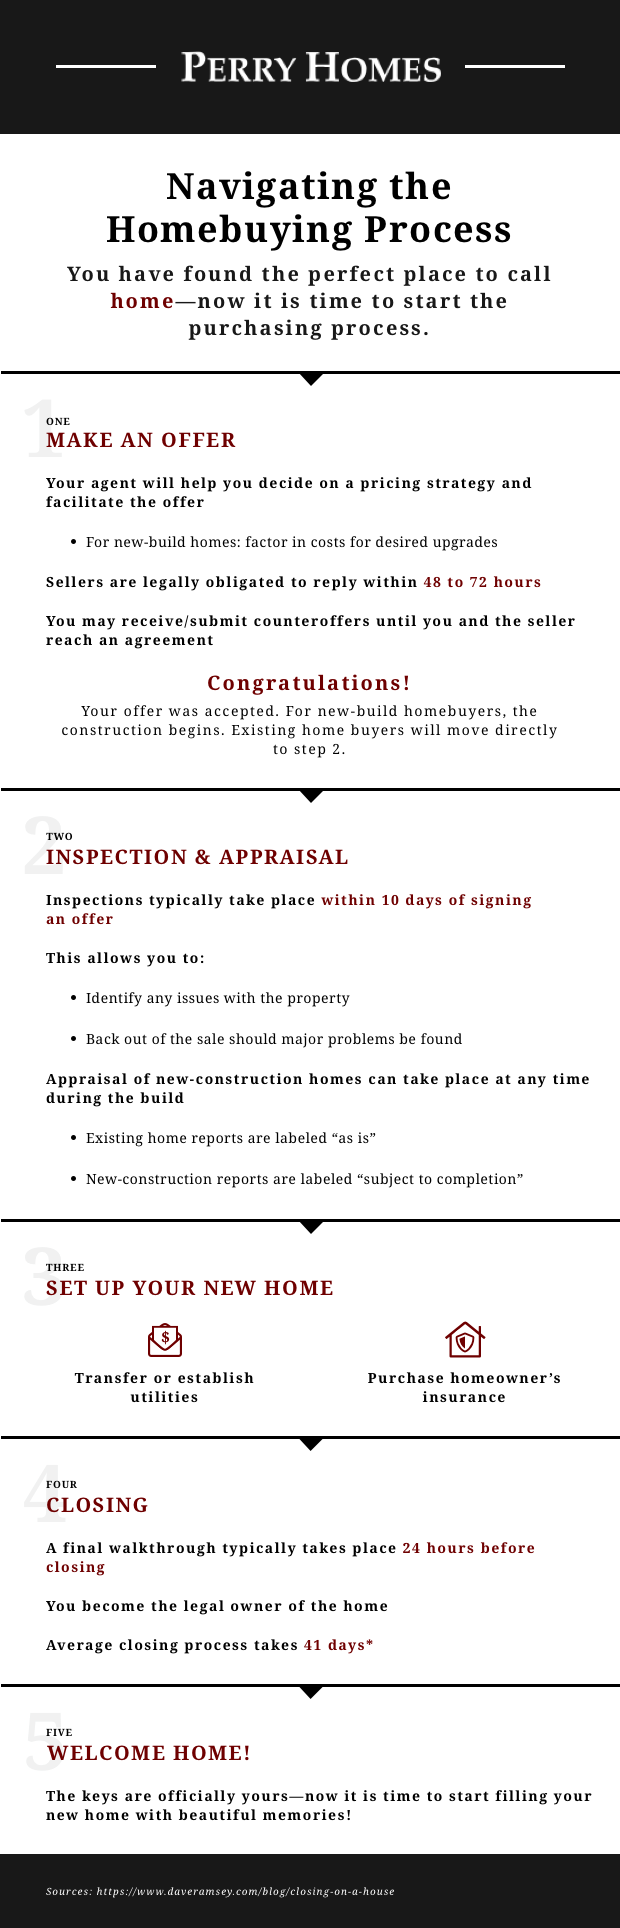 Perry Homes has your simplified guide to each step in the homebuying process: making an offer, inspection and appraisal, setup, and closing.